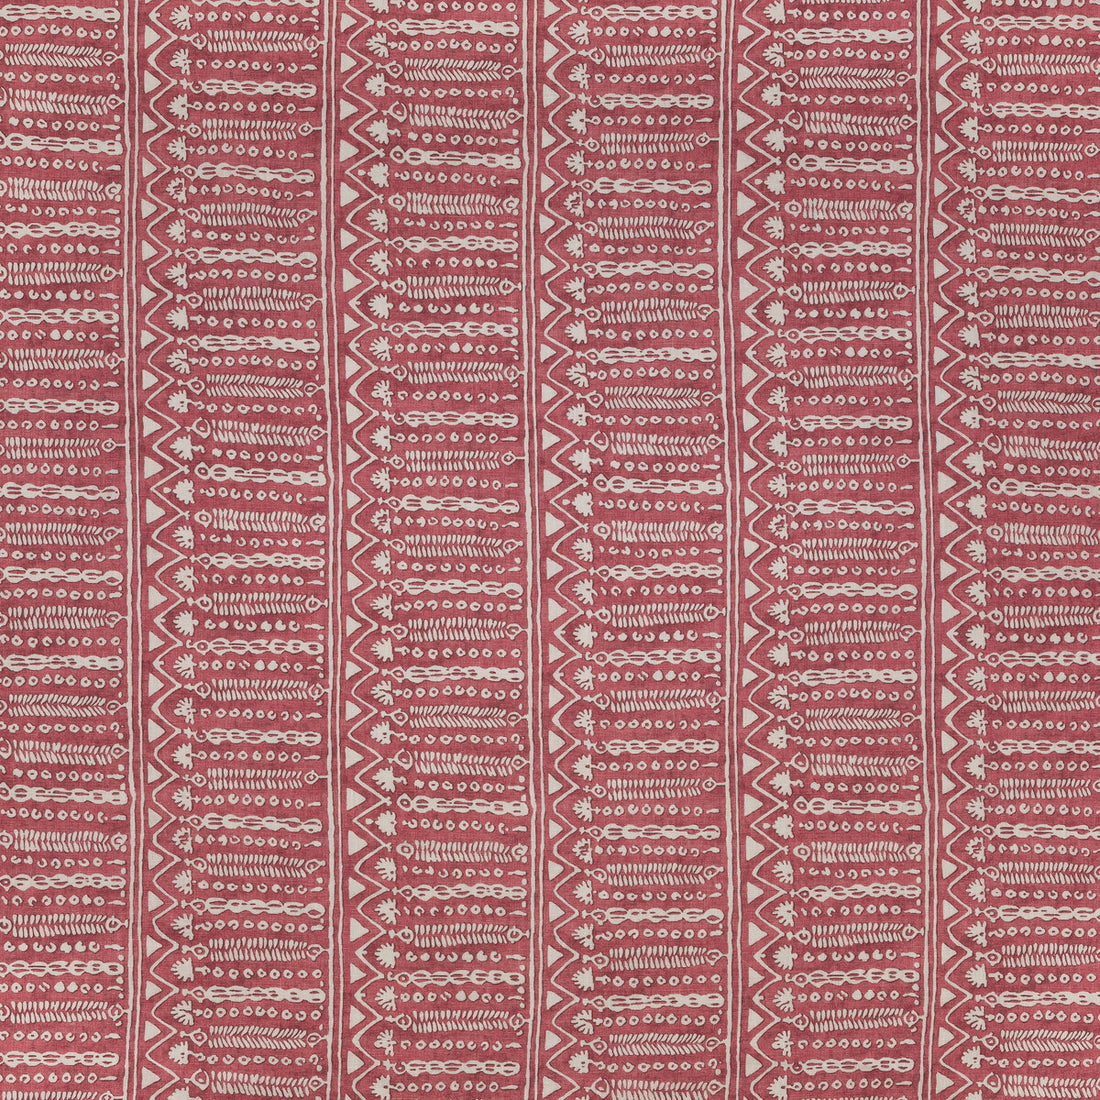 Abingdon fabric in red color - pattern BFC-3694.19.0 - by Lee Jofa in the Blithfield collection